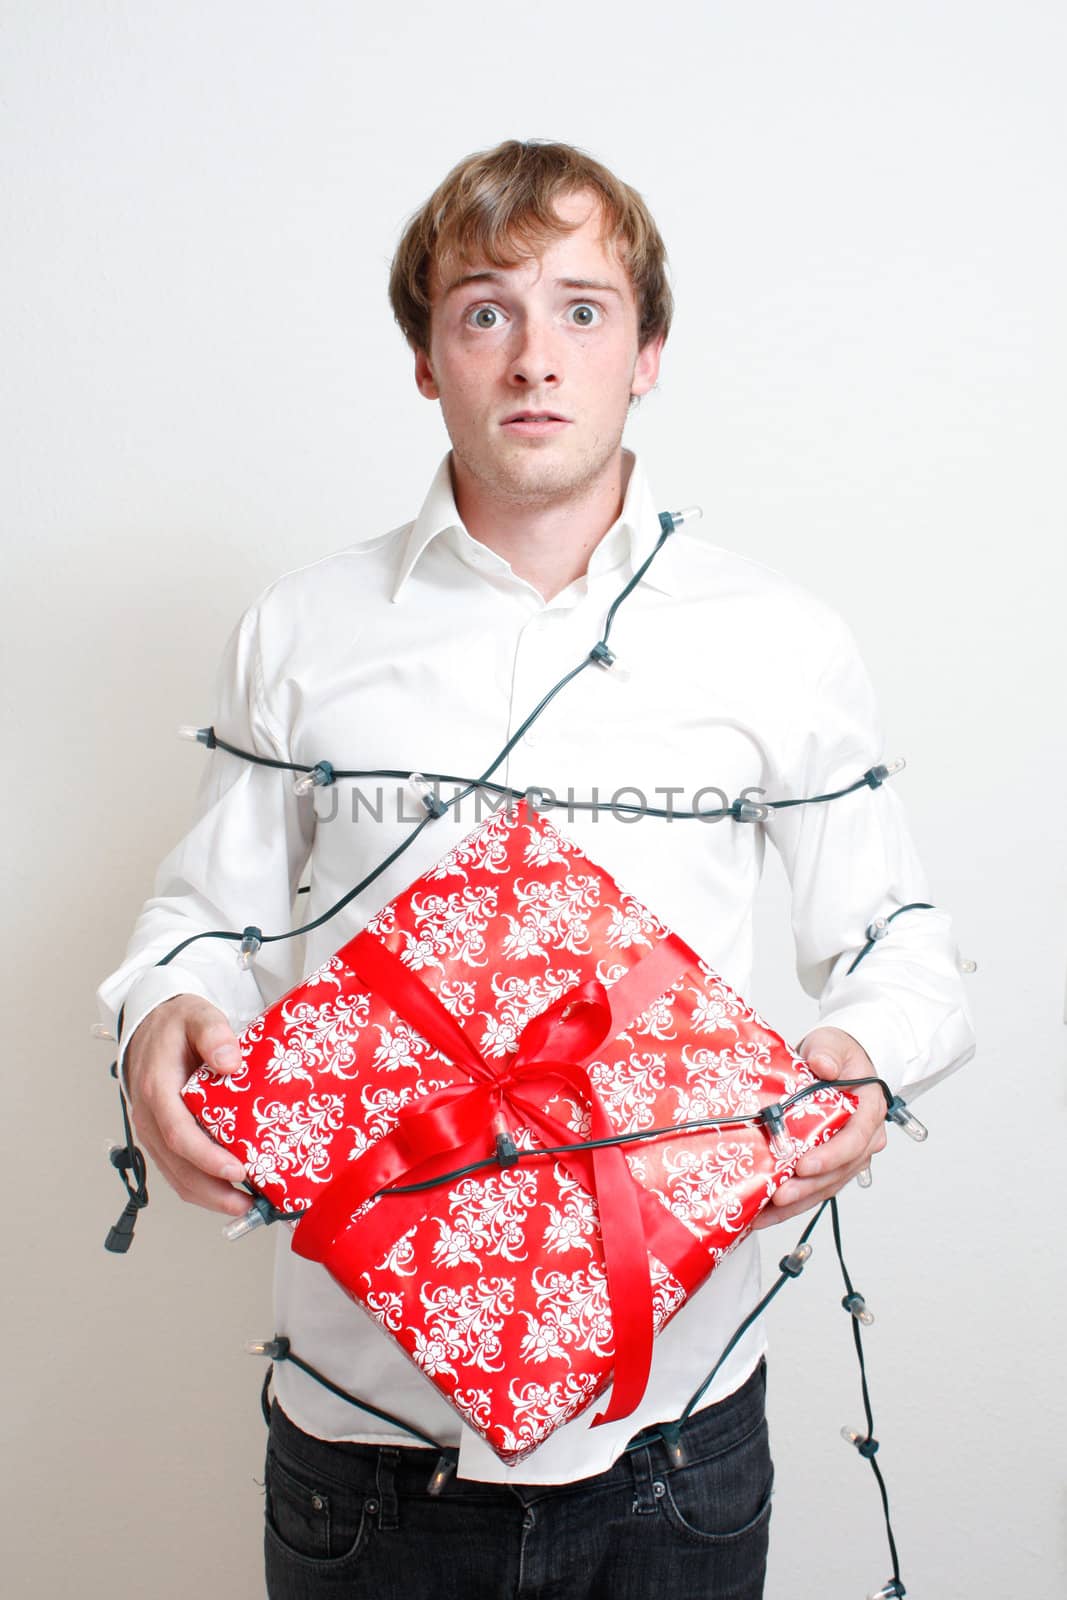 A depressed man holding a present